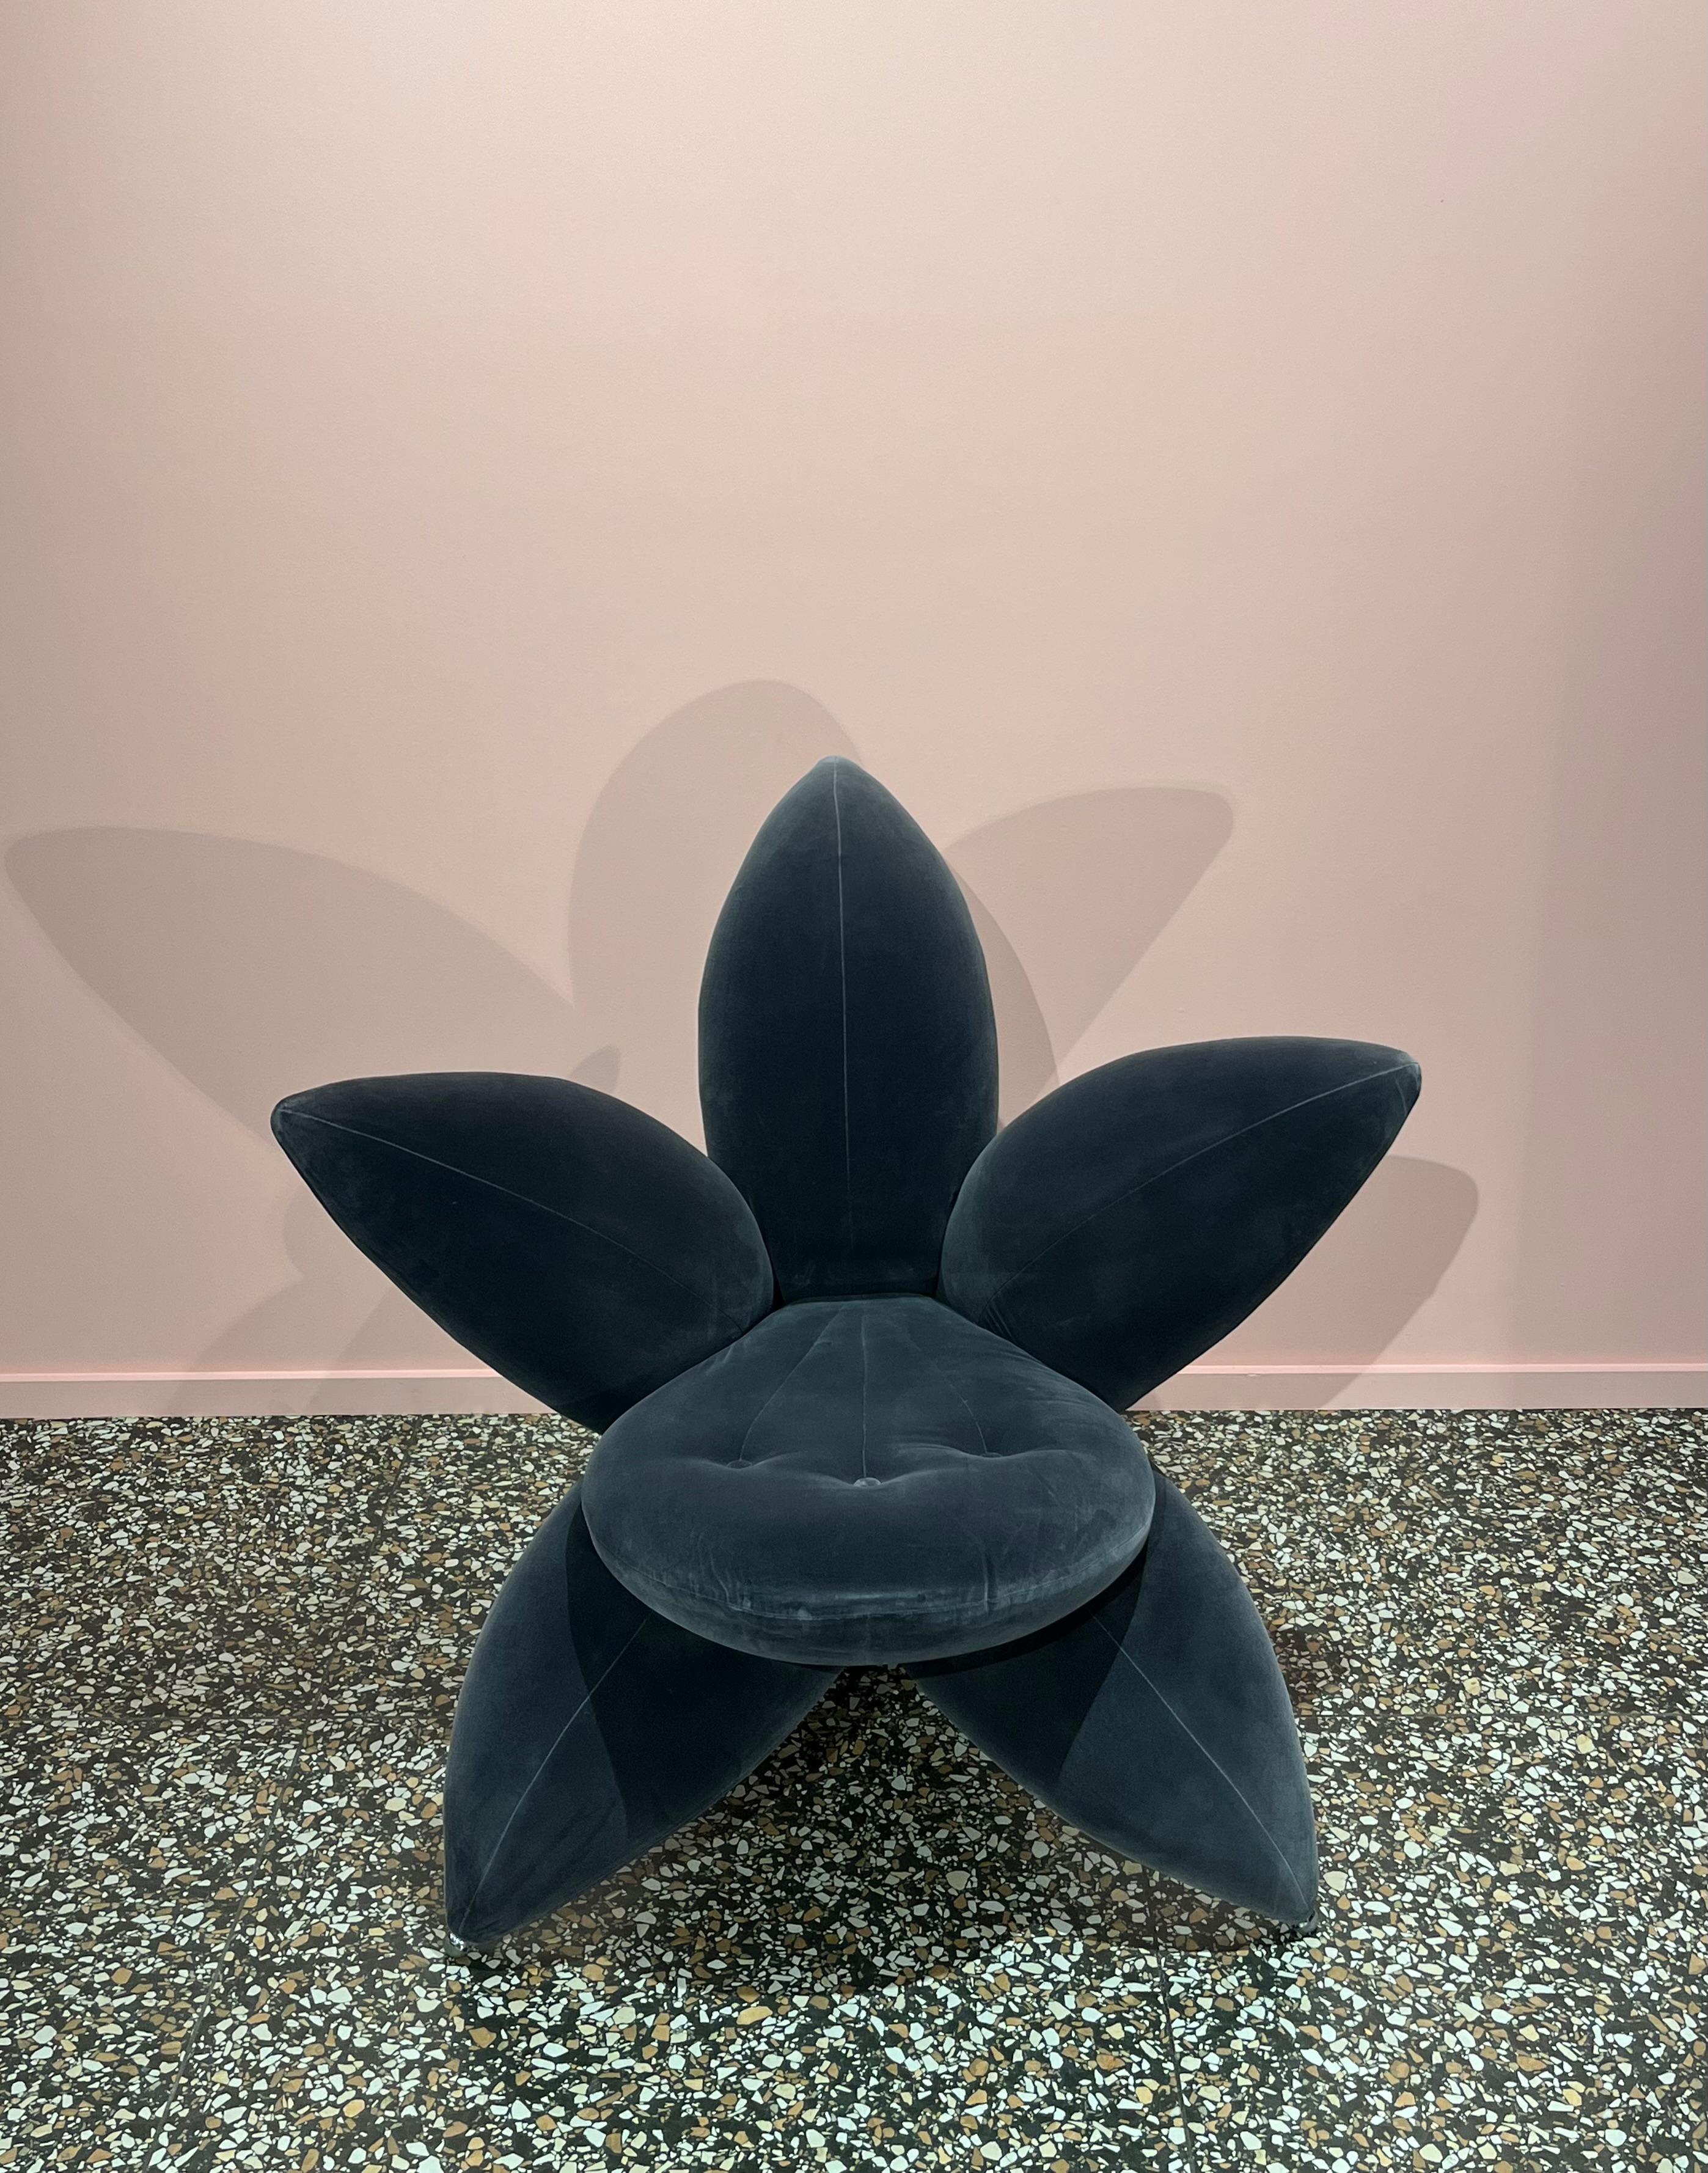 The Getsuen or Lily chaise longue was designed by Japanese designer Masanori Umeda in the 1990s. 
He worked in Italy in collaboration with the company Edra, which specialises in the design of inventive new fabrics and sculptural forms for chairs.